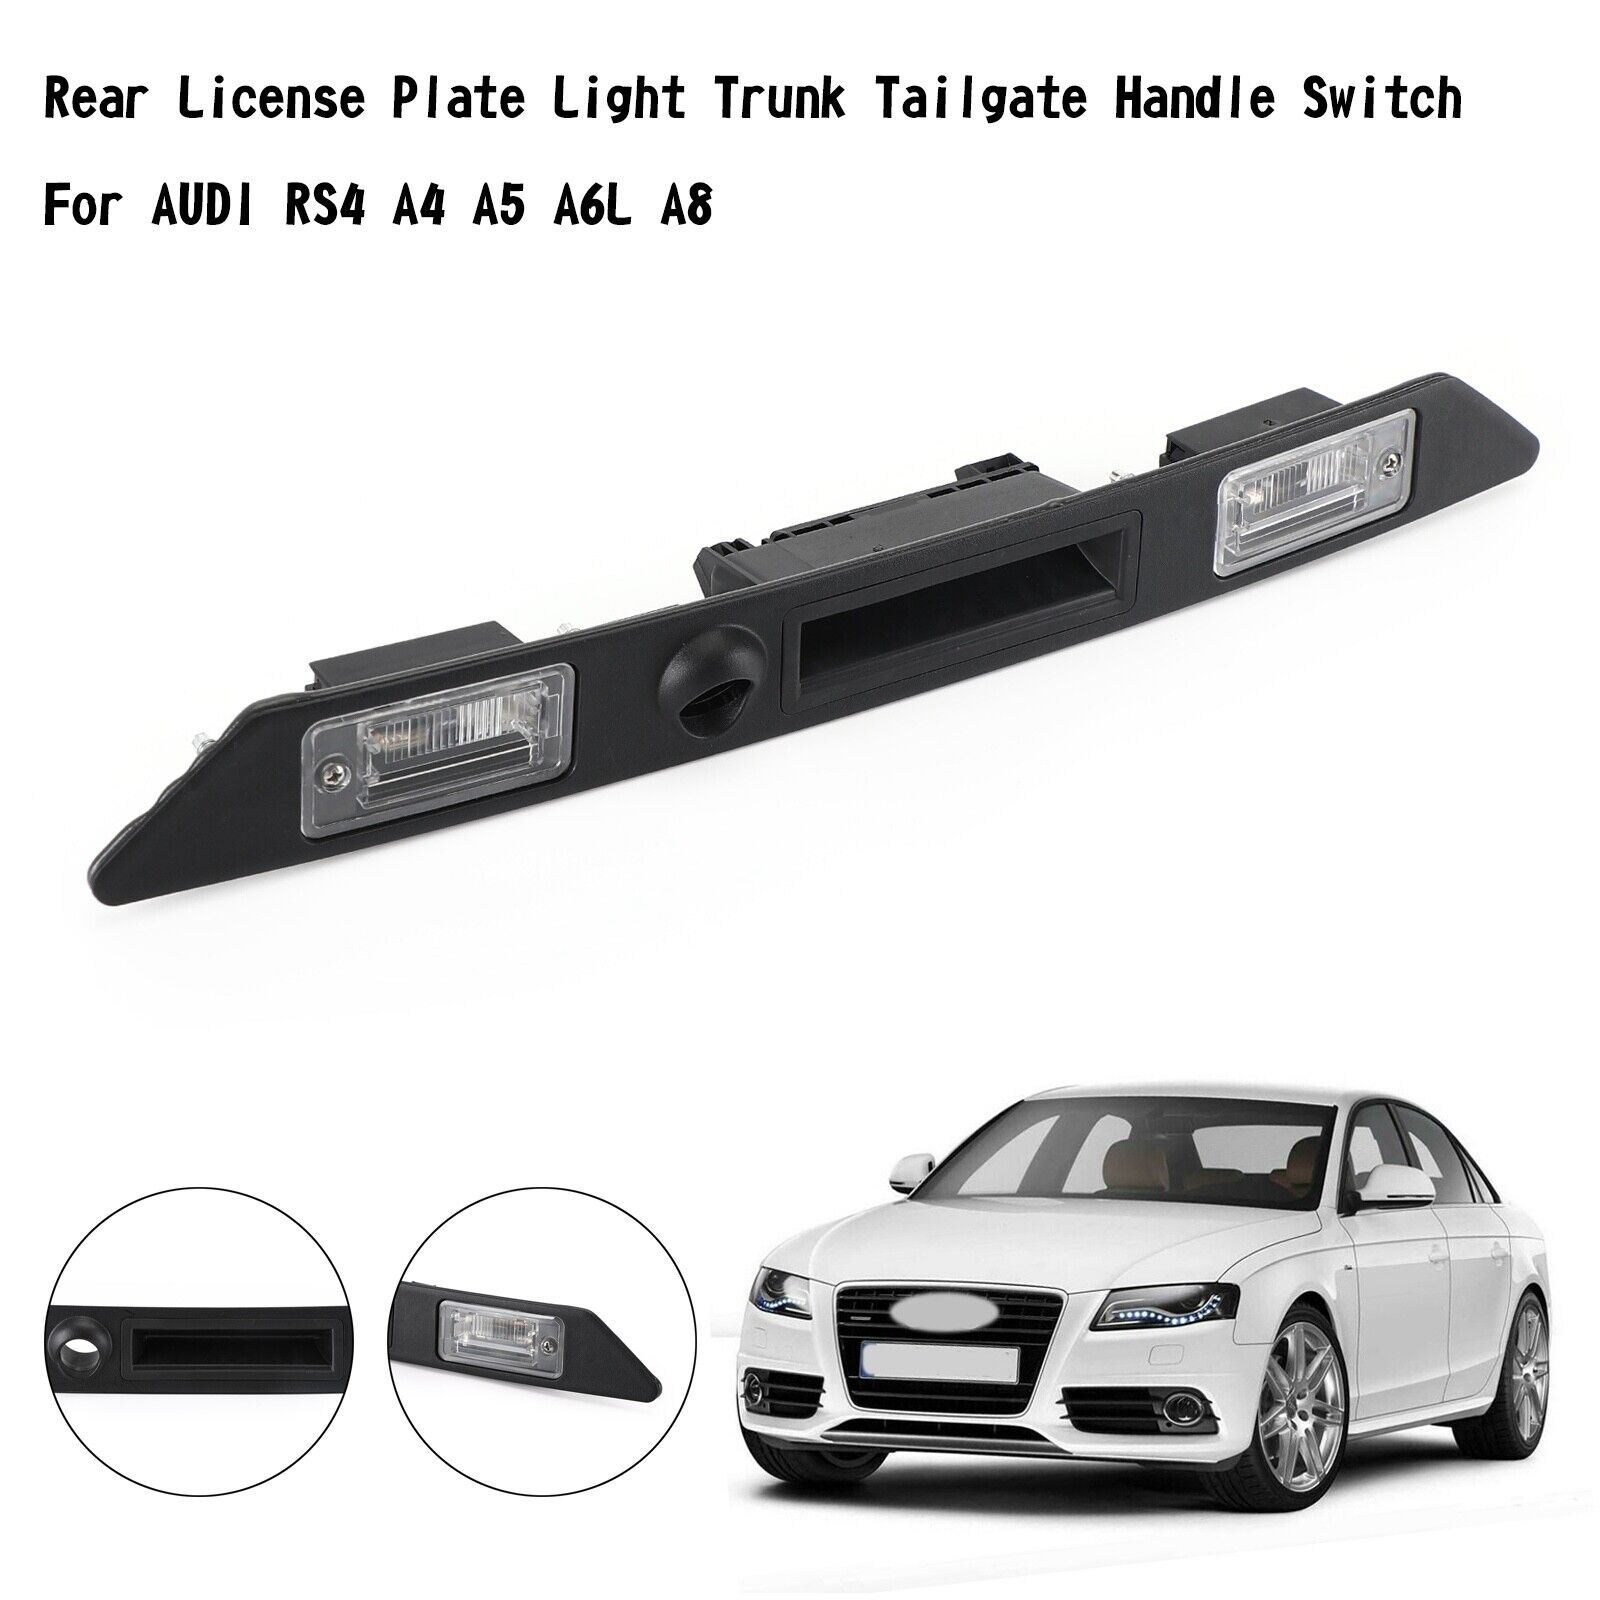 Rear License Plate Light Trunk Tailgate Handle Switch For AUDI RS4 A4 A5 A6L